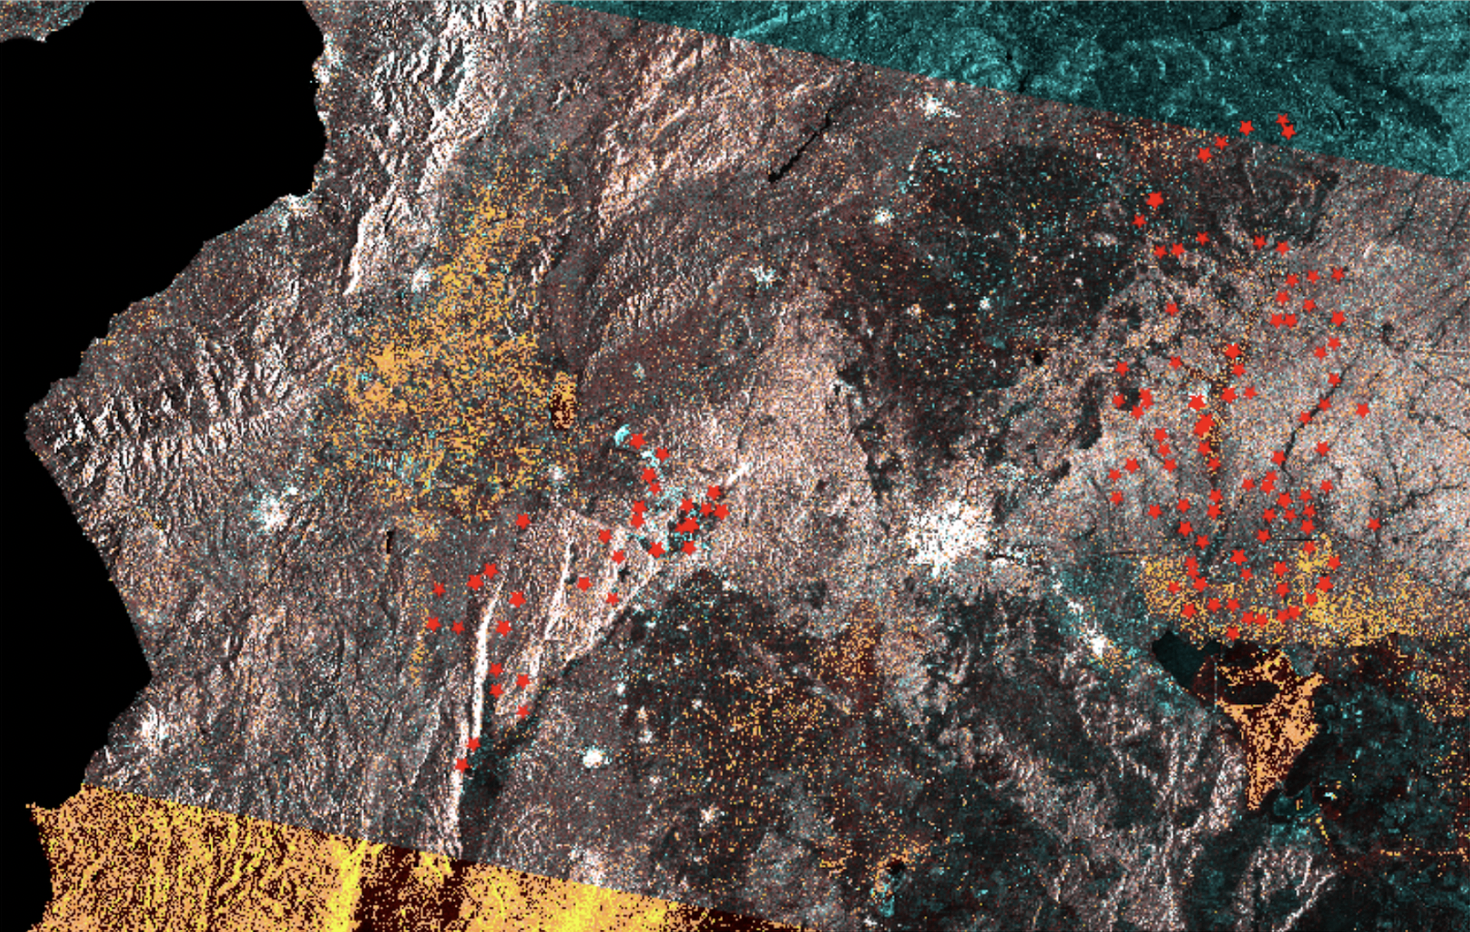 Remote sensing and geospatial analysis of conflict zones conducted by Space4Good